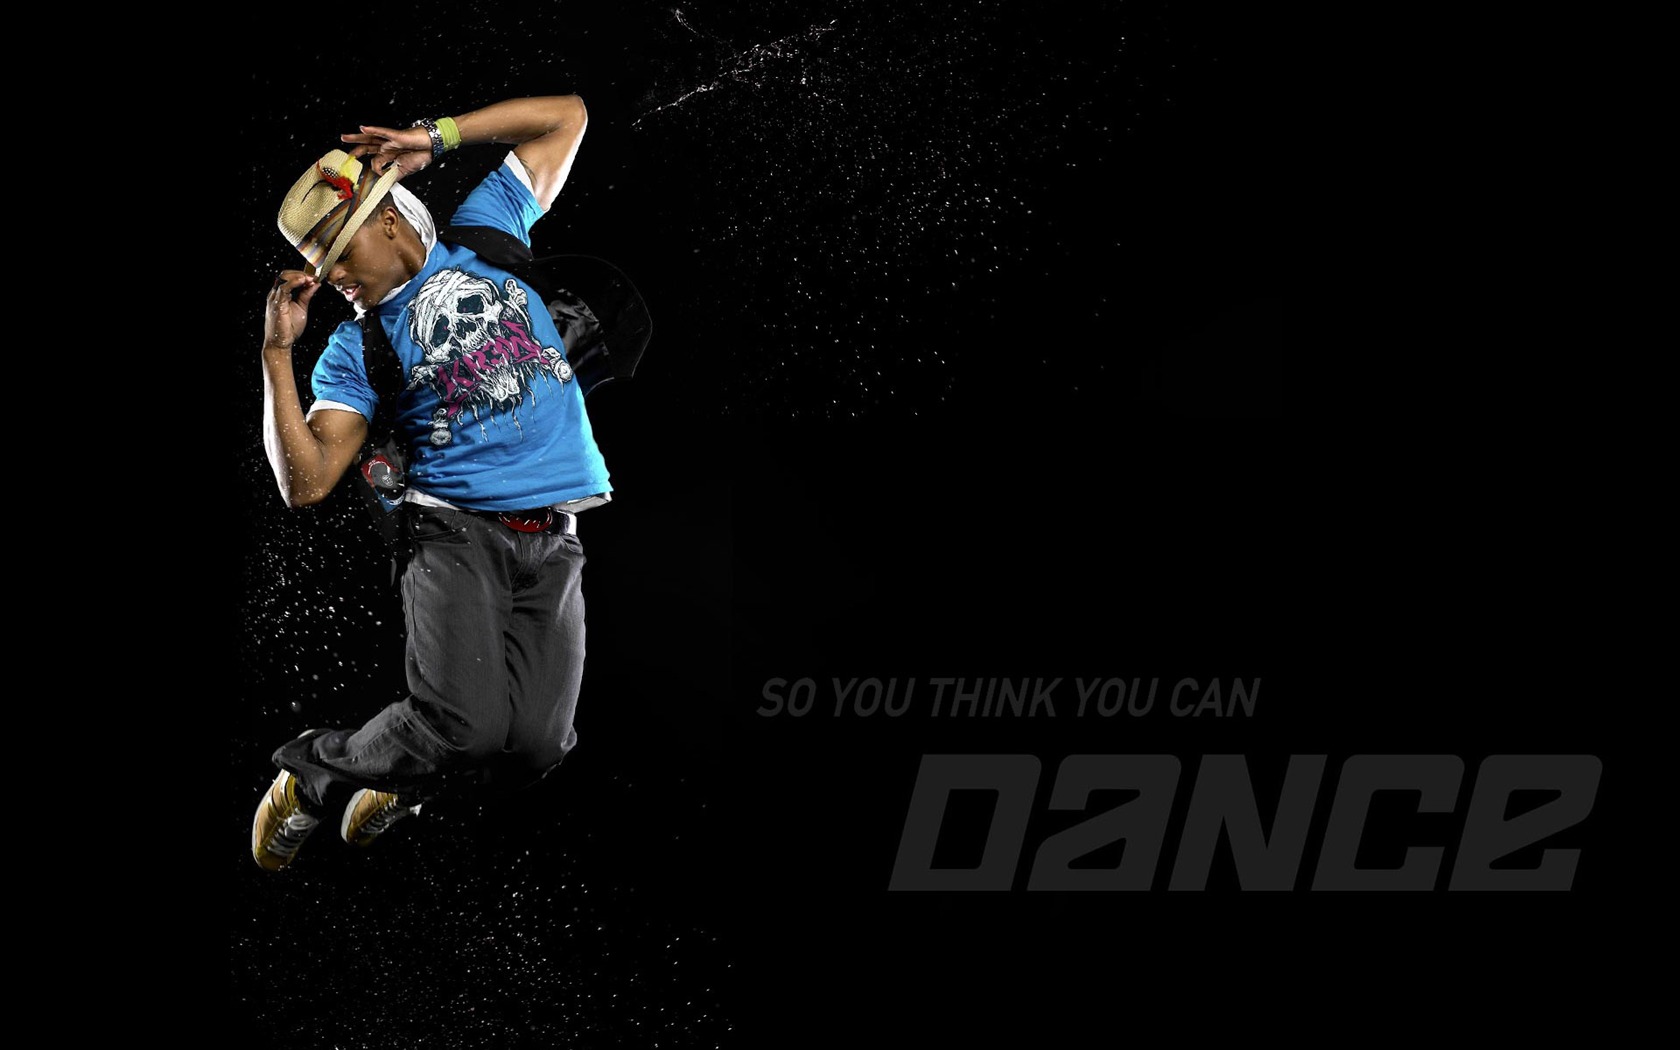 So You Think You Can Dance 舞林争霸 壁纸(一)20 - 1680x1050